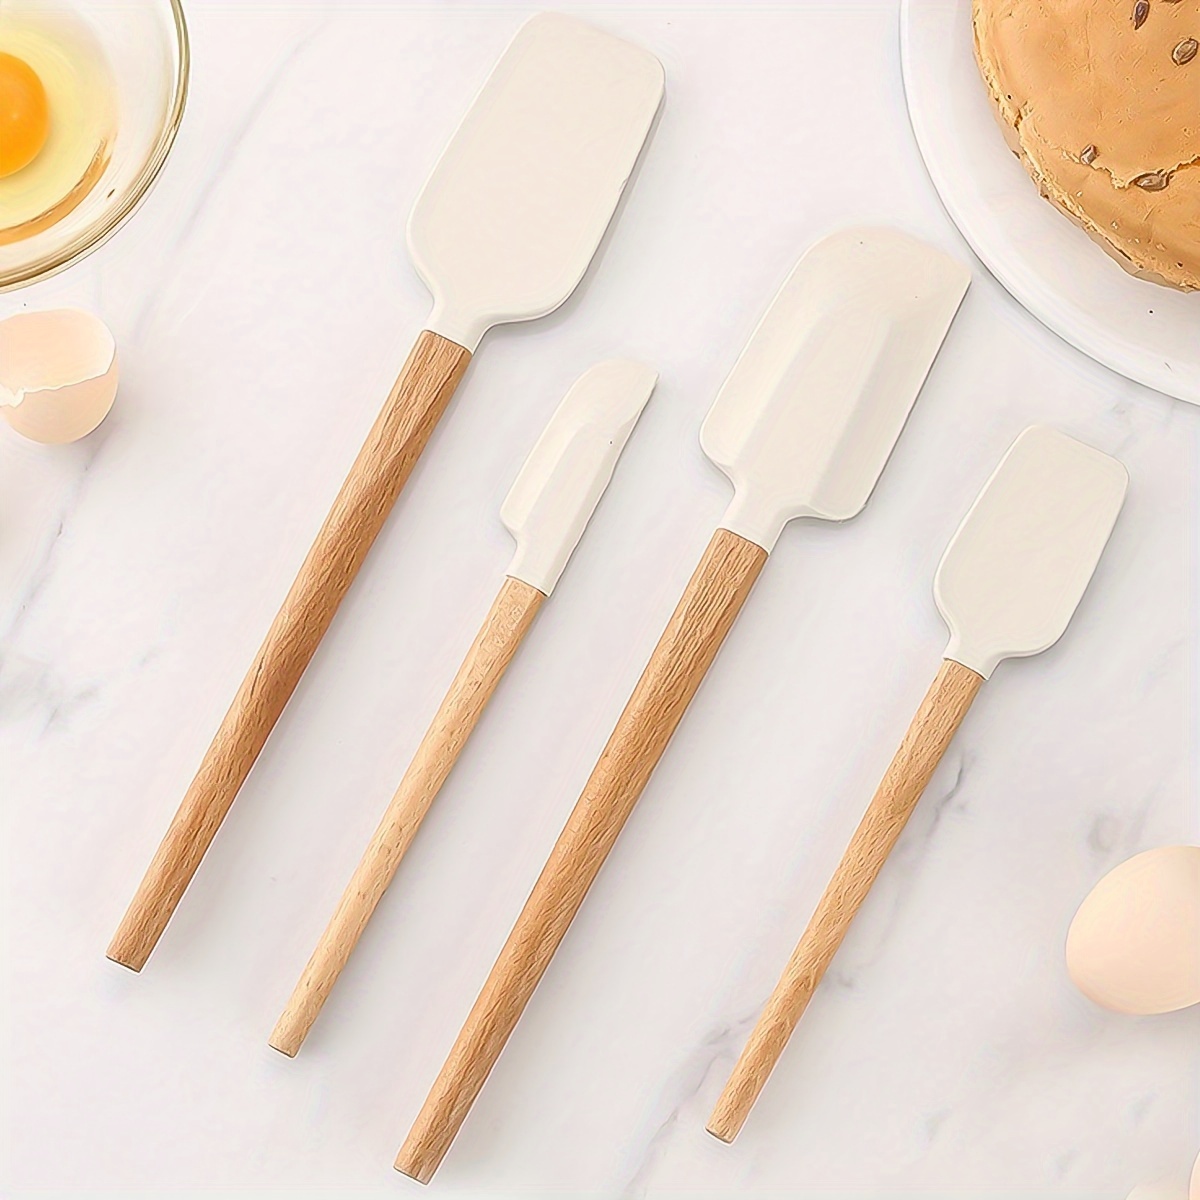 4pcs Set Food Grade Silicone Spatula Set Baking Scraper Cooking And Mixing  Heat Resistant Non Stick Dishwasher Safe Silicone Spatula Bpa Free Clean  With Easy Kitchen Tools Kitchen Supplies